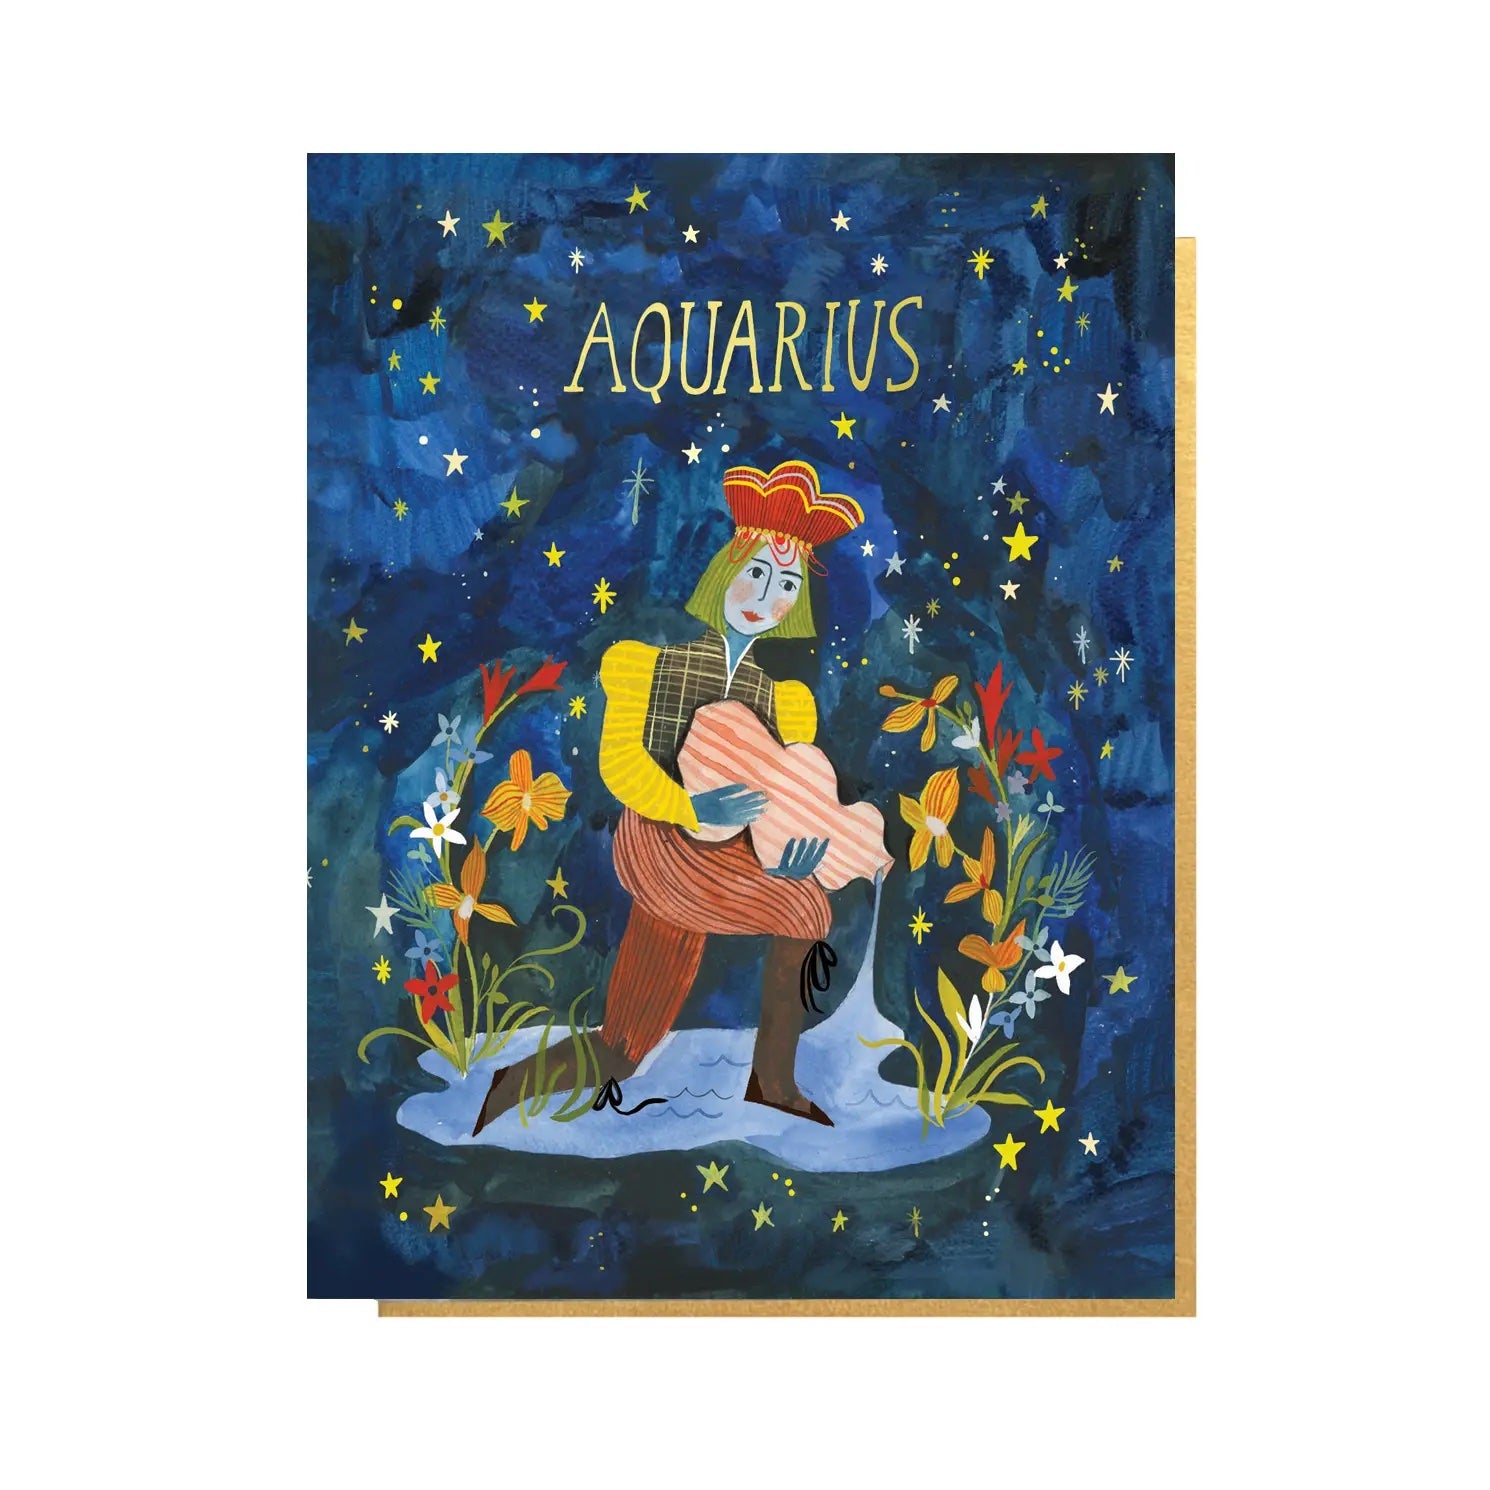 Folding card with illustration of a water-bearer, flowers and starry sky Aquarius written above